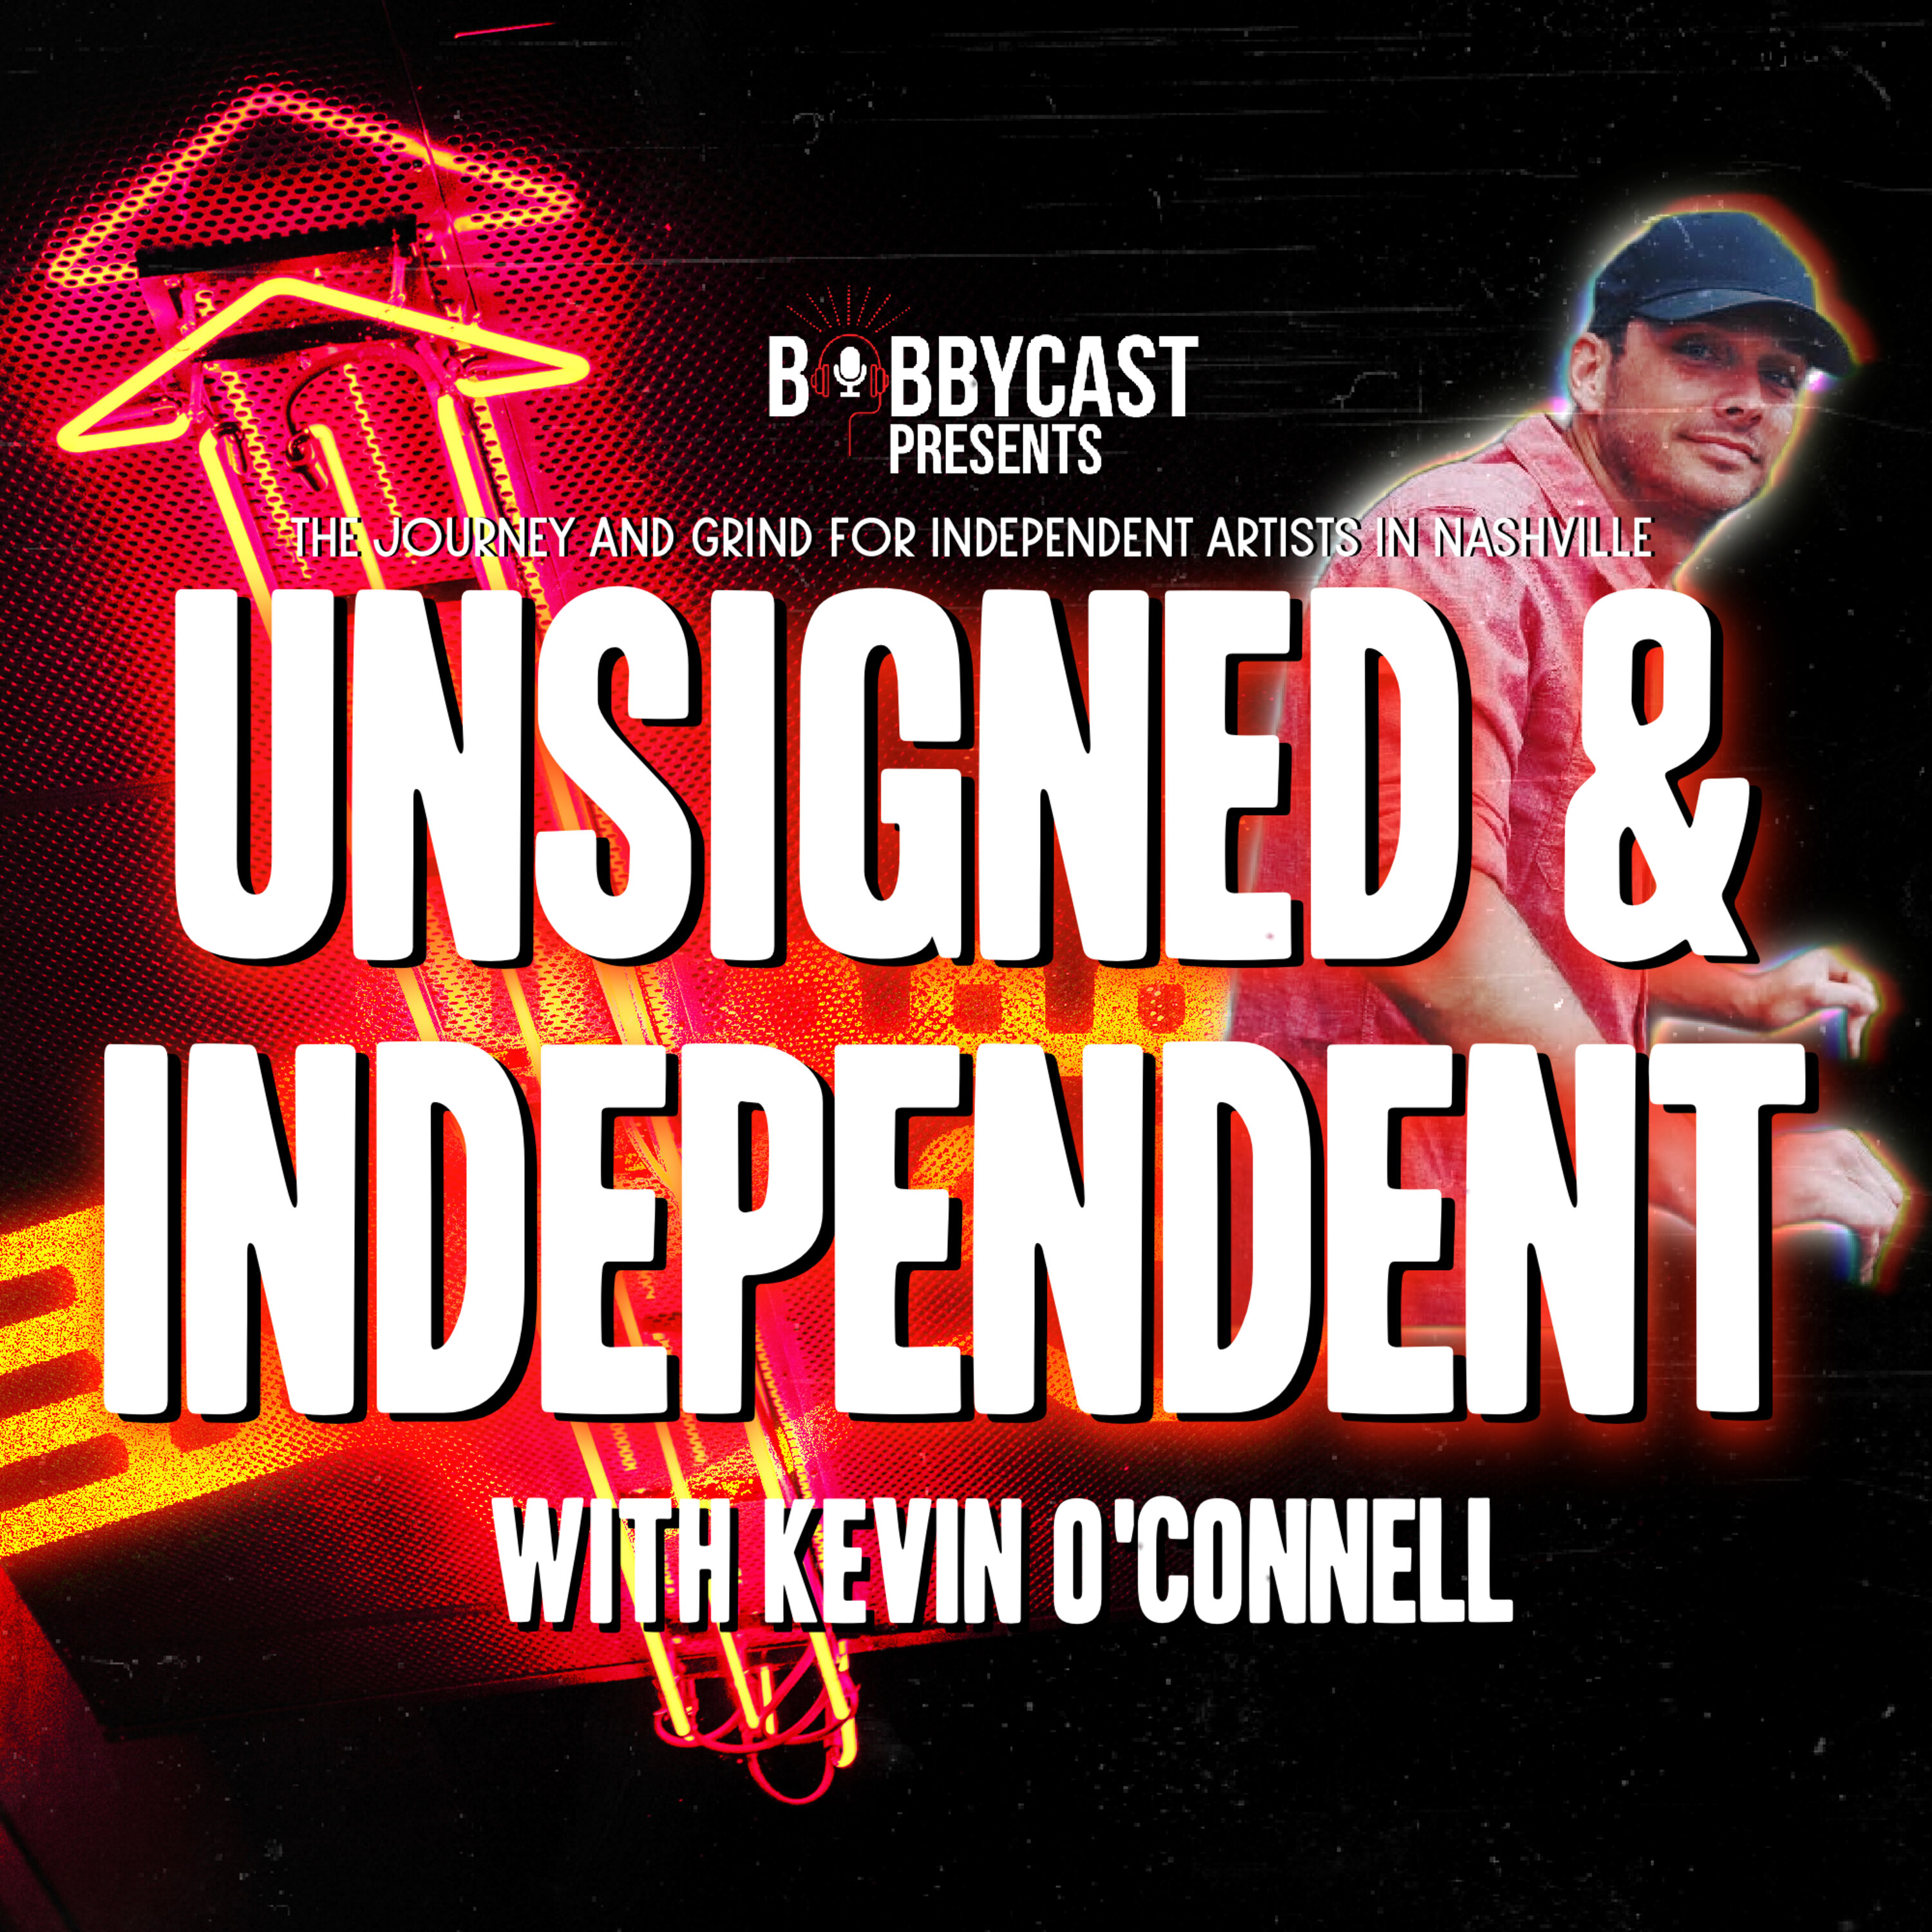 BobbyCast Presents: Unsigned & Independent:  Walker Montgomery - Creating His Own Path